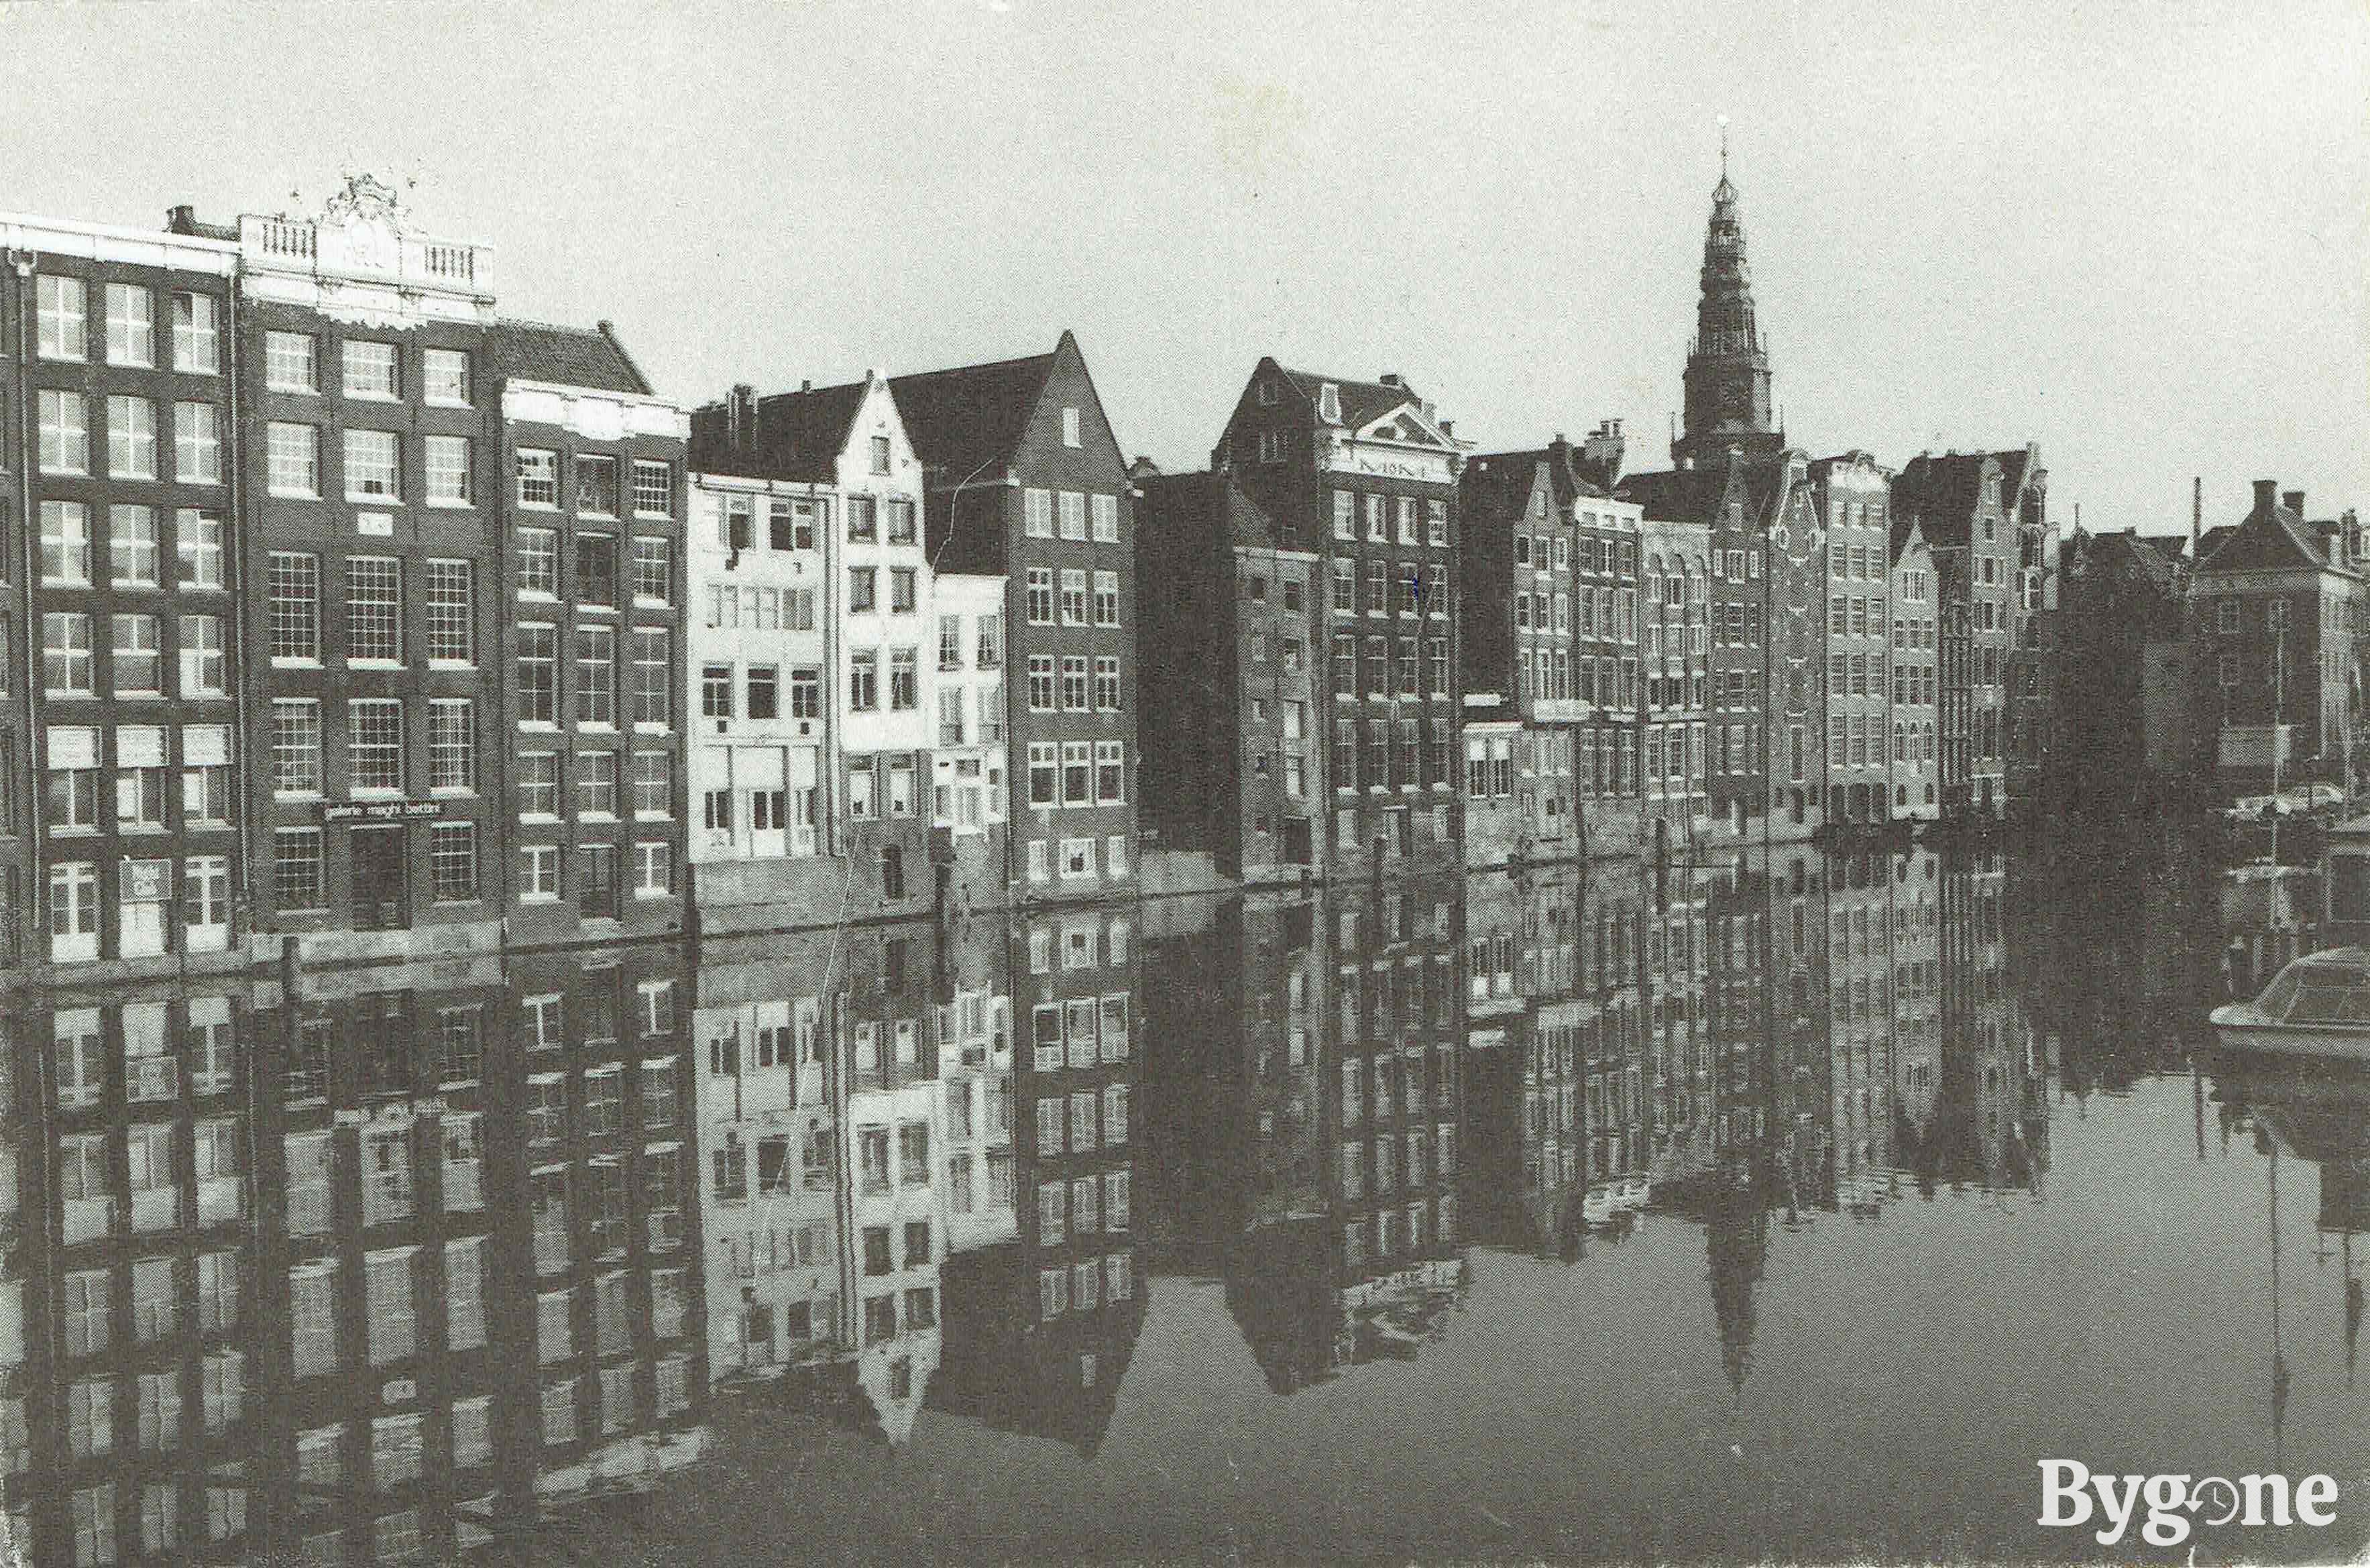 A beautiful mirror image in black and white of a row of waterfront townhouses reflected in the water of a still canal.